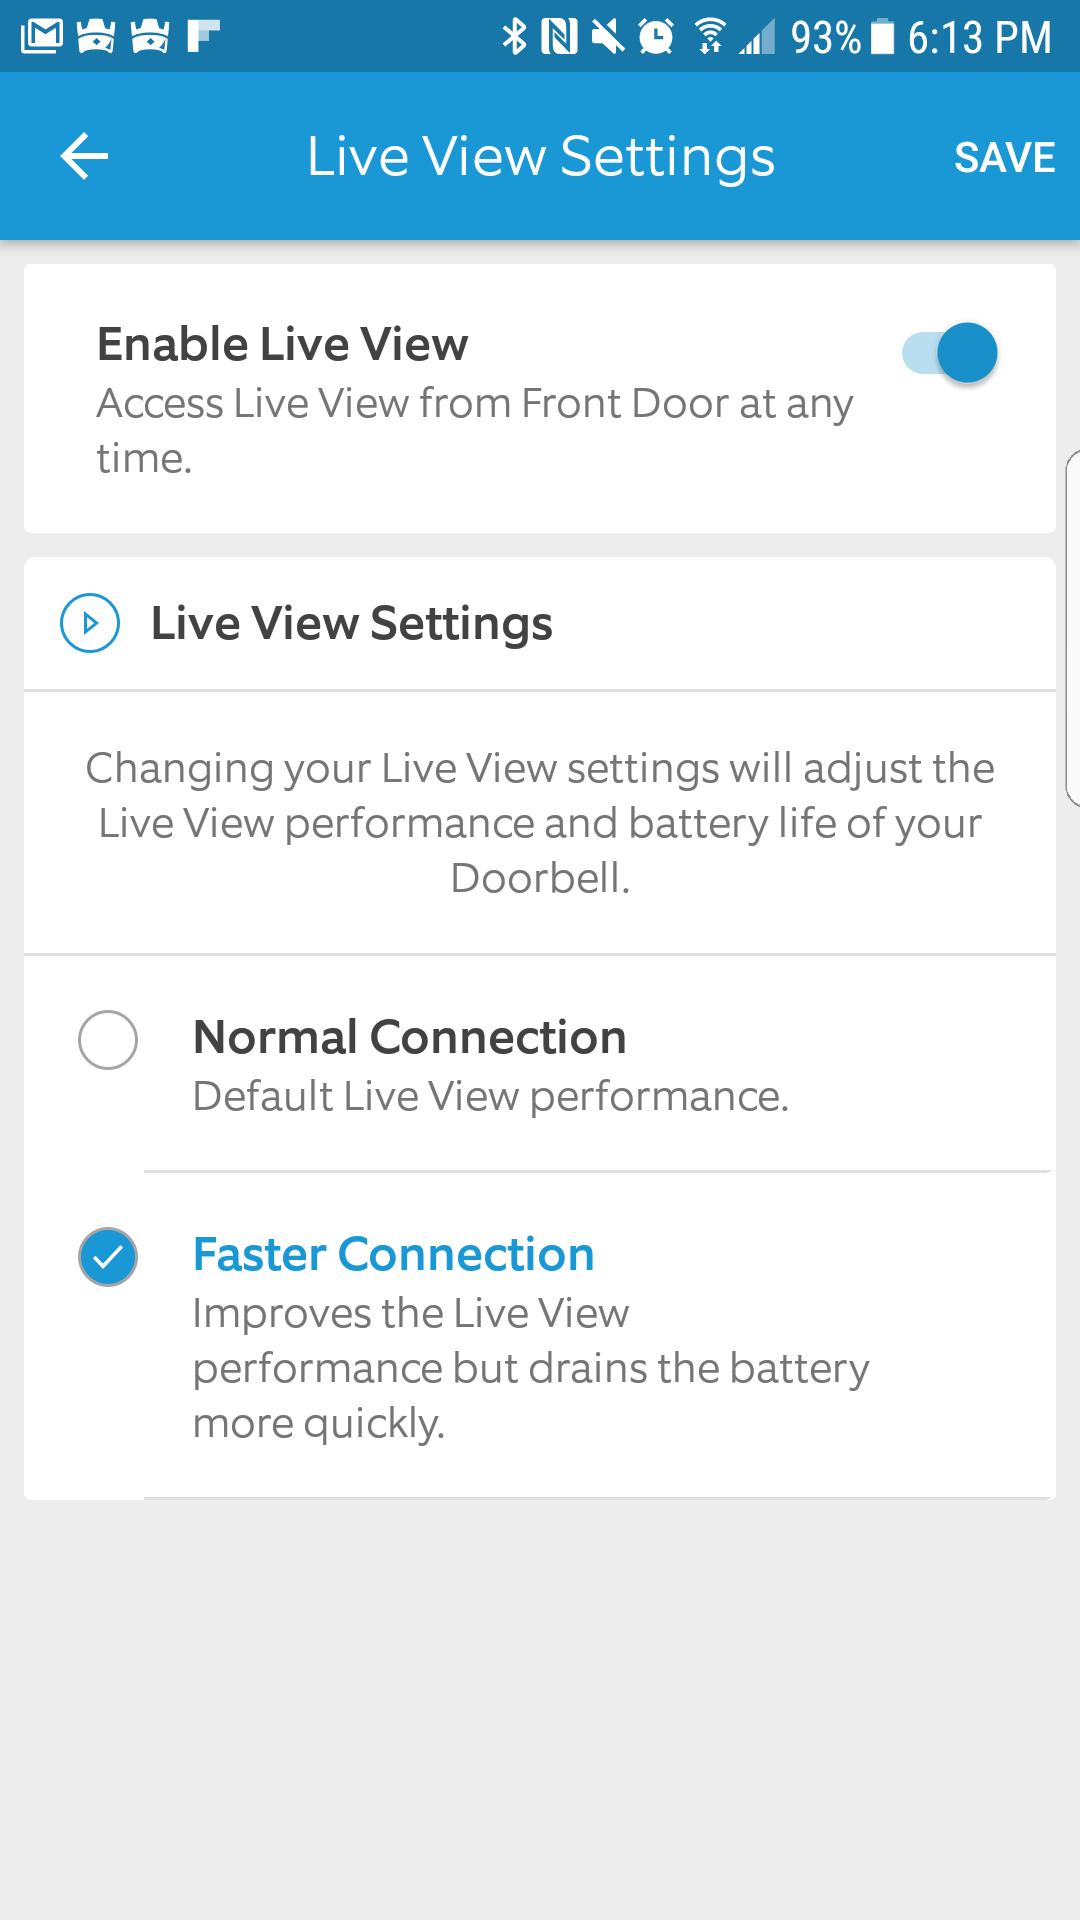 The Live View Settings are important. Make sure and try both settings and see which performs best on your network.